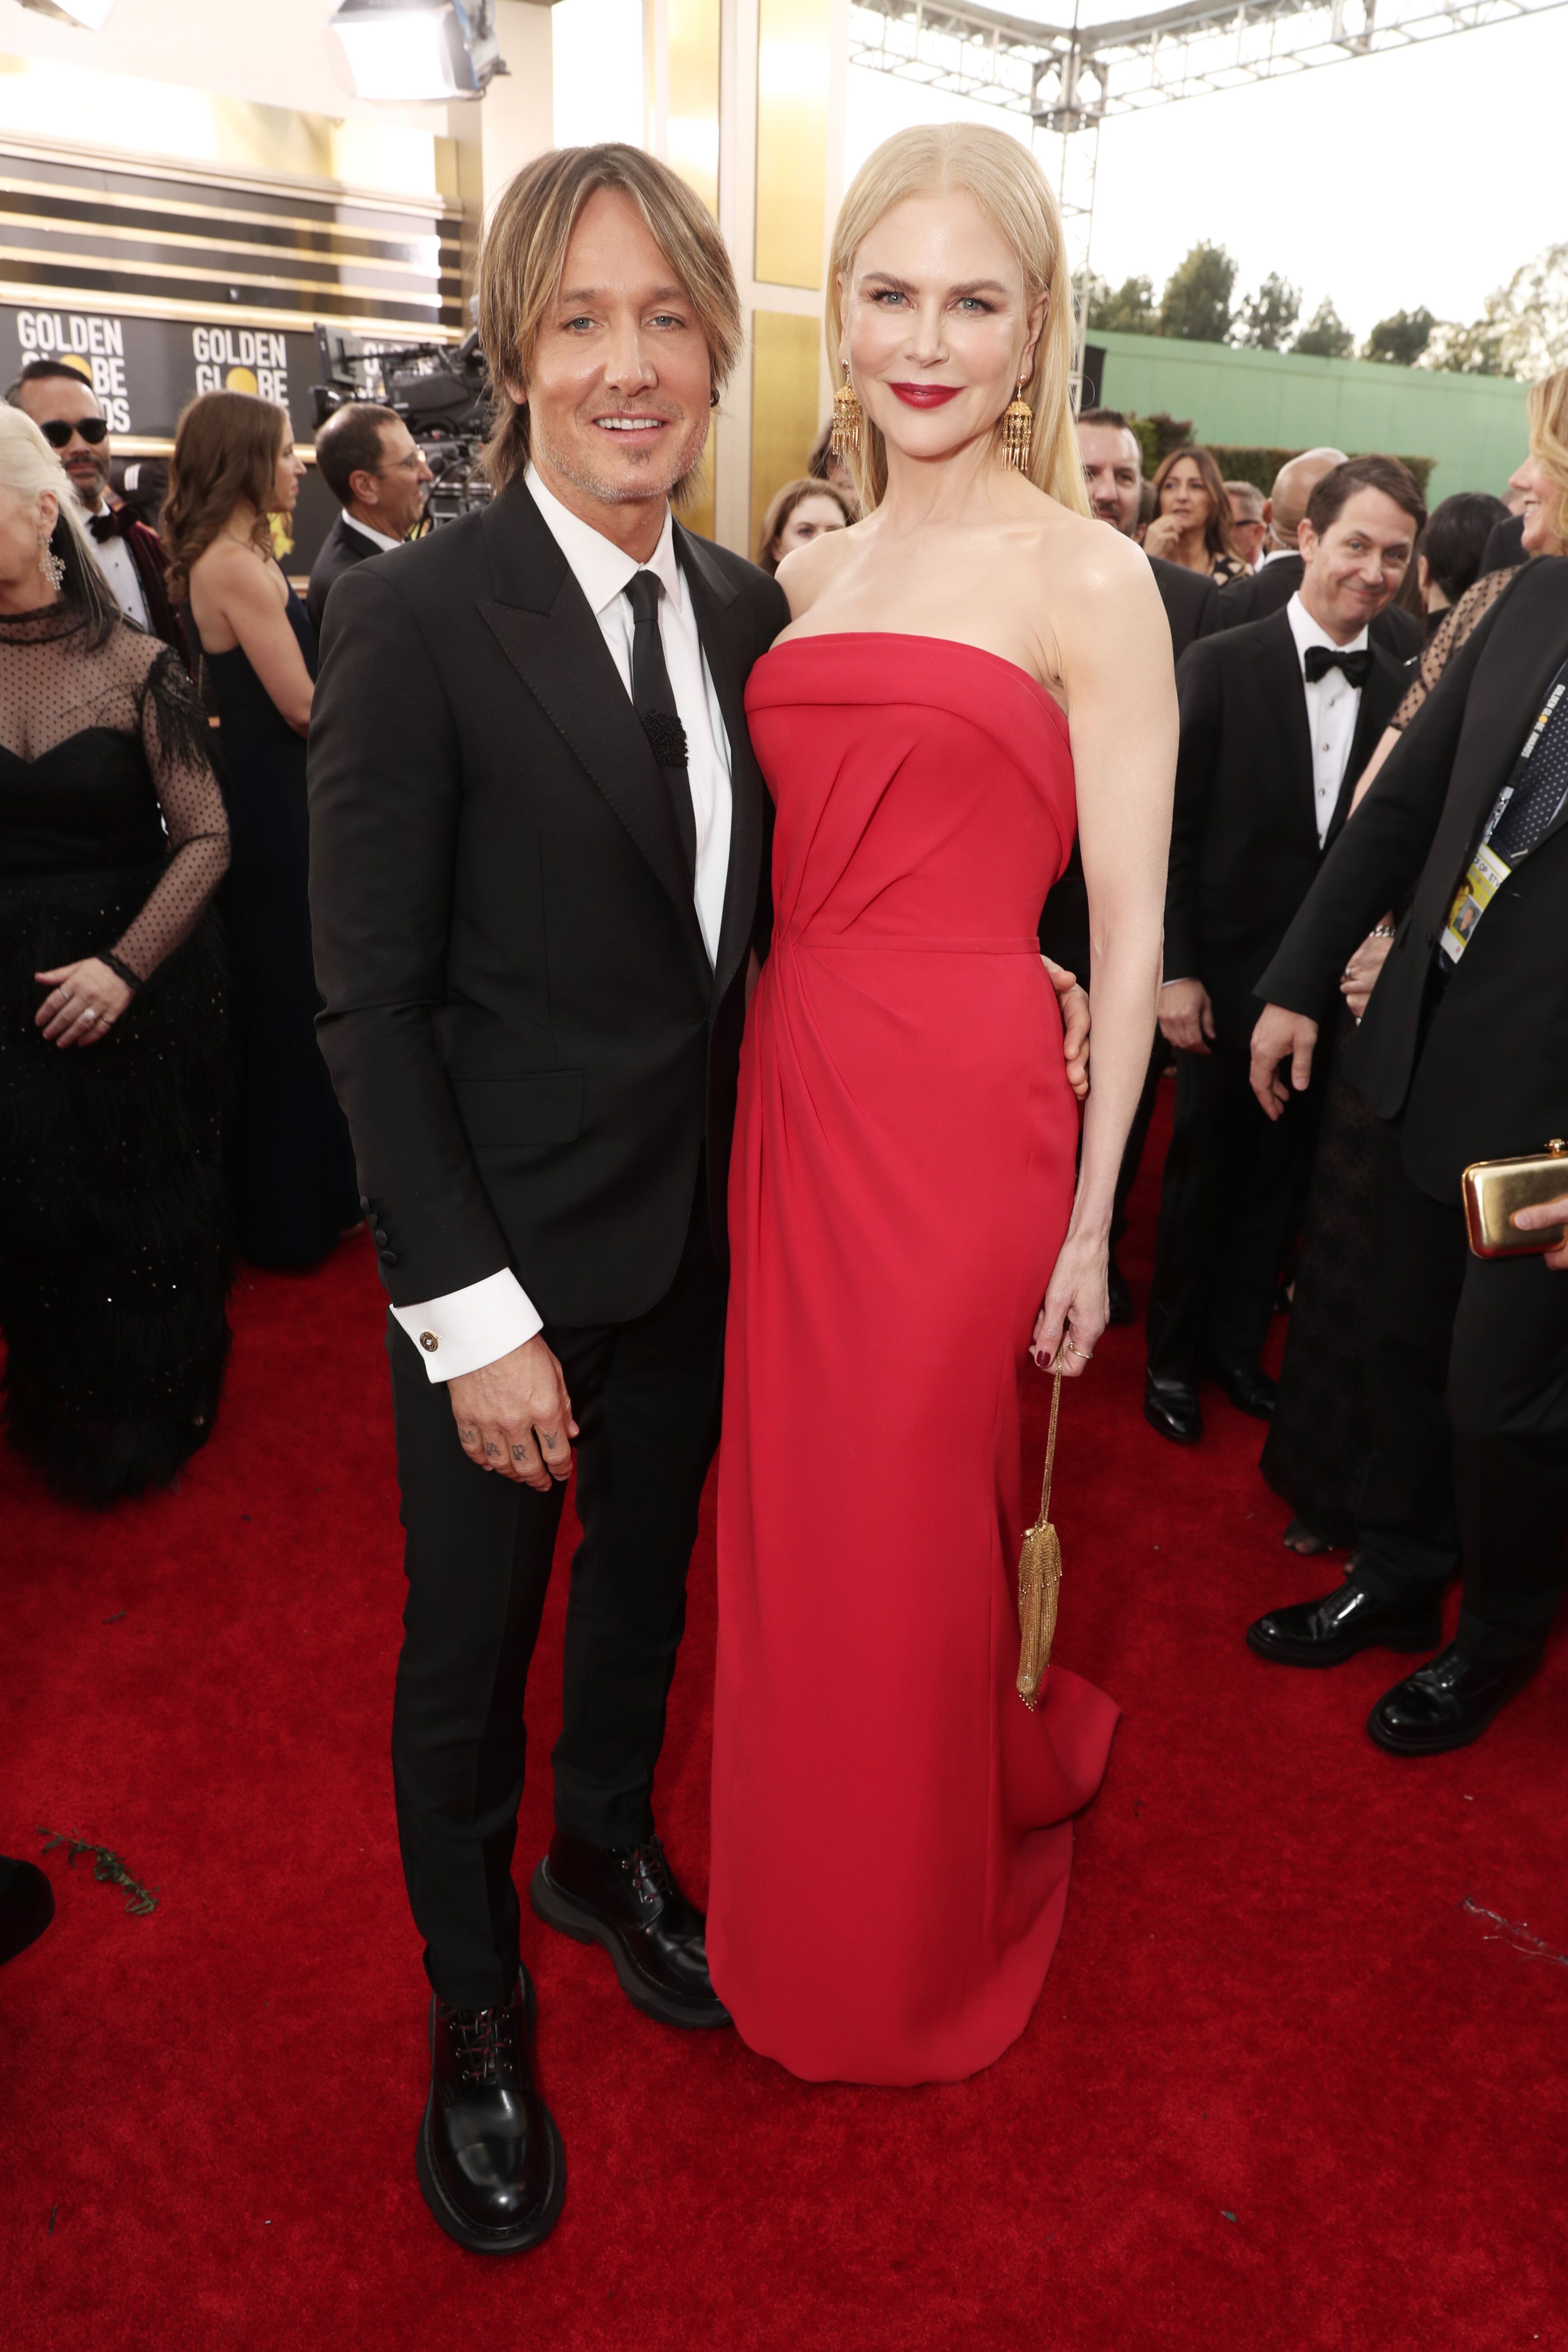 Keith Urban and Nicole Kidman at the 77th Annual Golden Globe Awards on January 5, 2020 | Photo: Todd Williamson/Getty Images